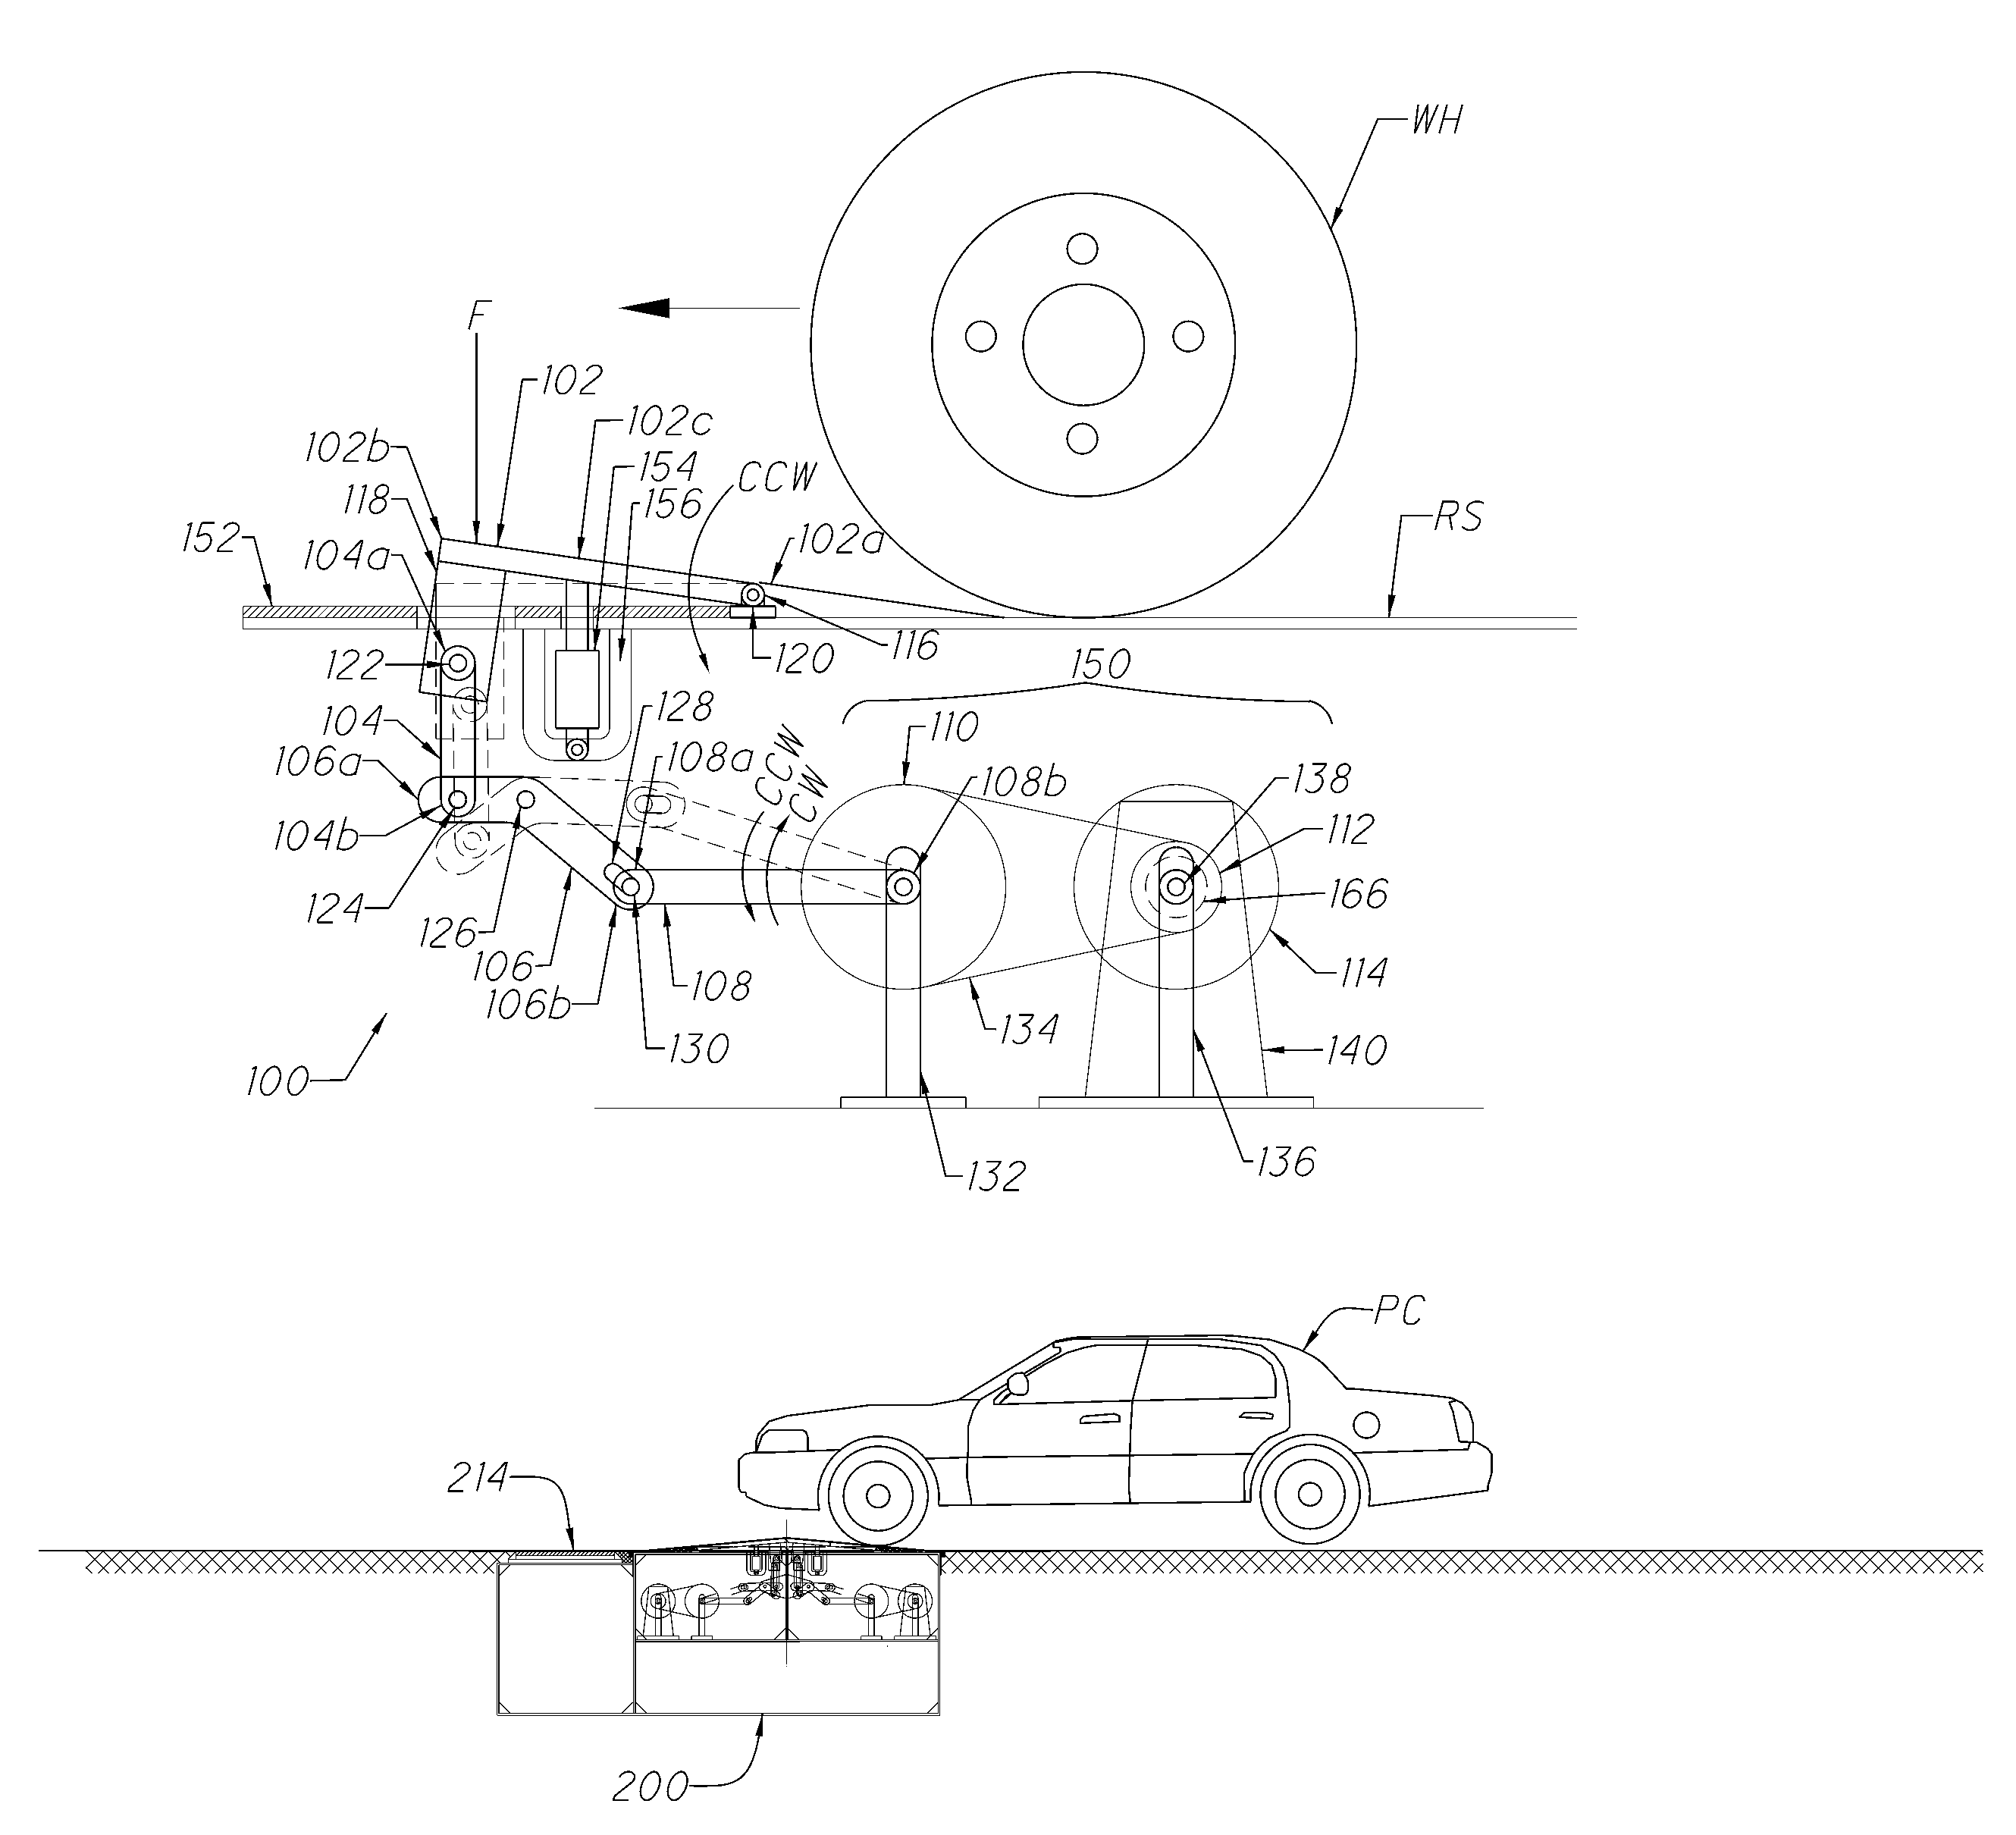 Electrical generator apparatus, particularly for use on a vehicle roadway